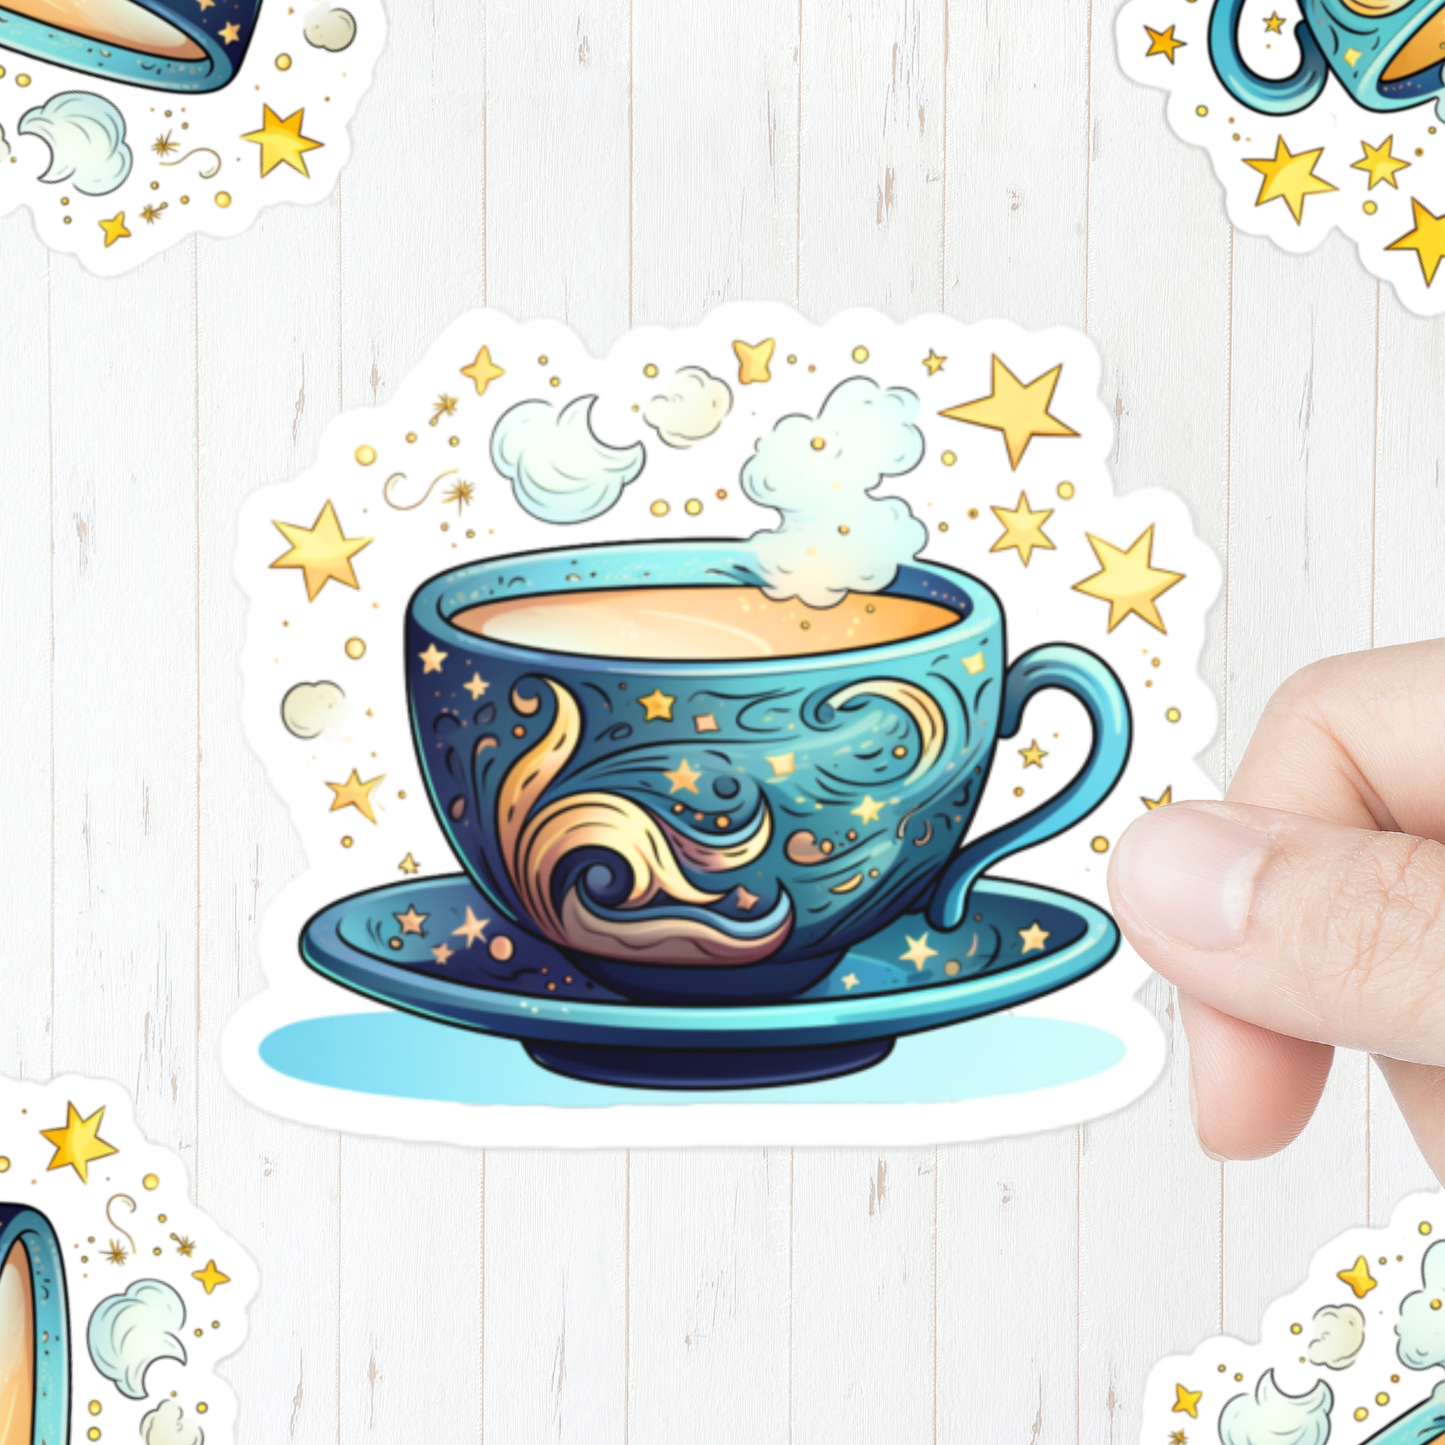 Teacup Sticker *FREE SHIPPING with any order over $10